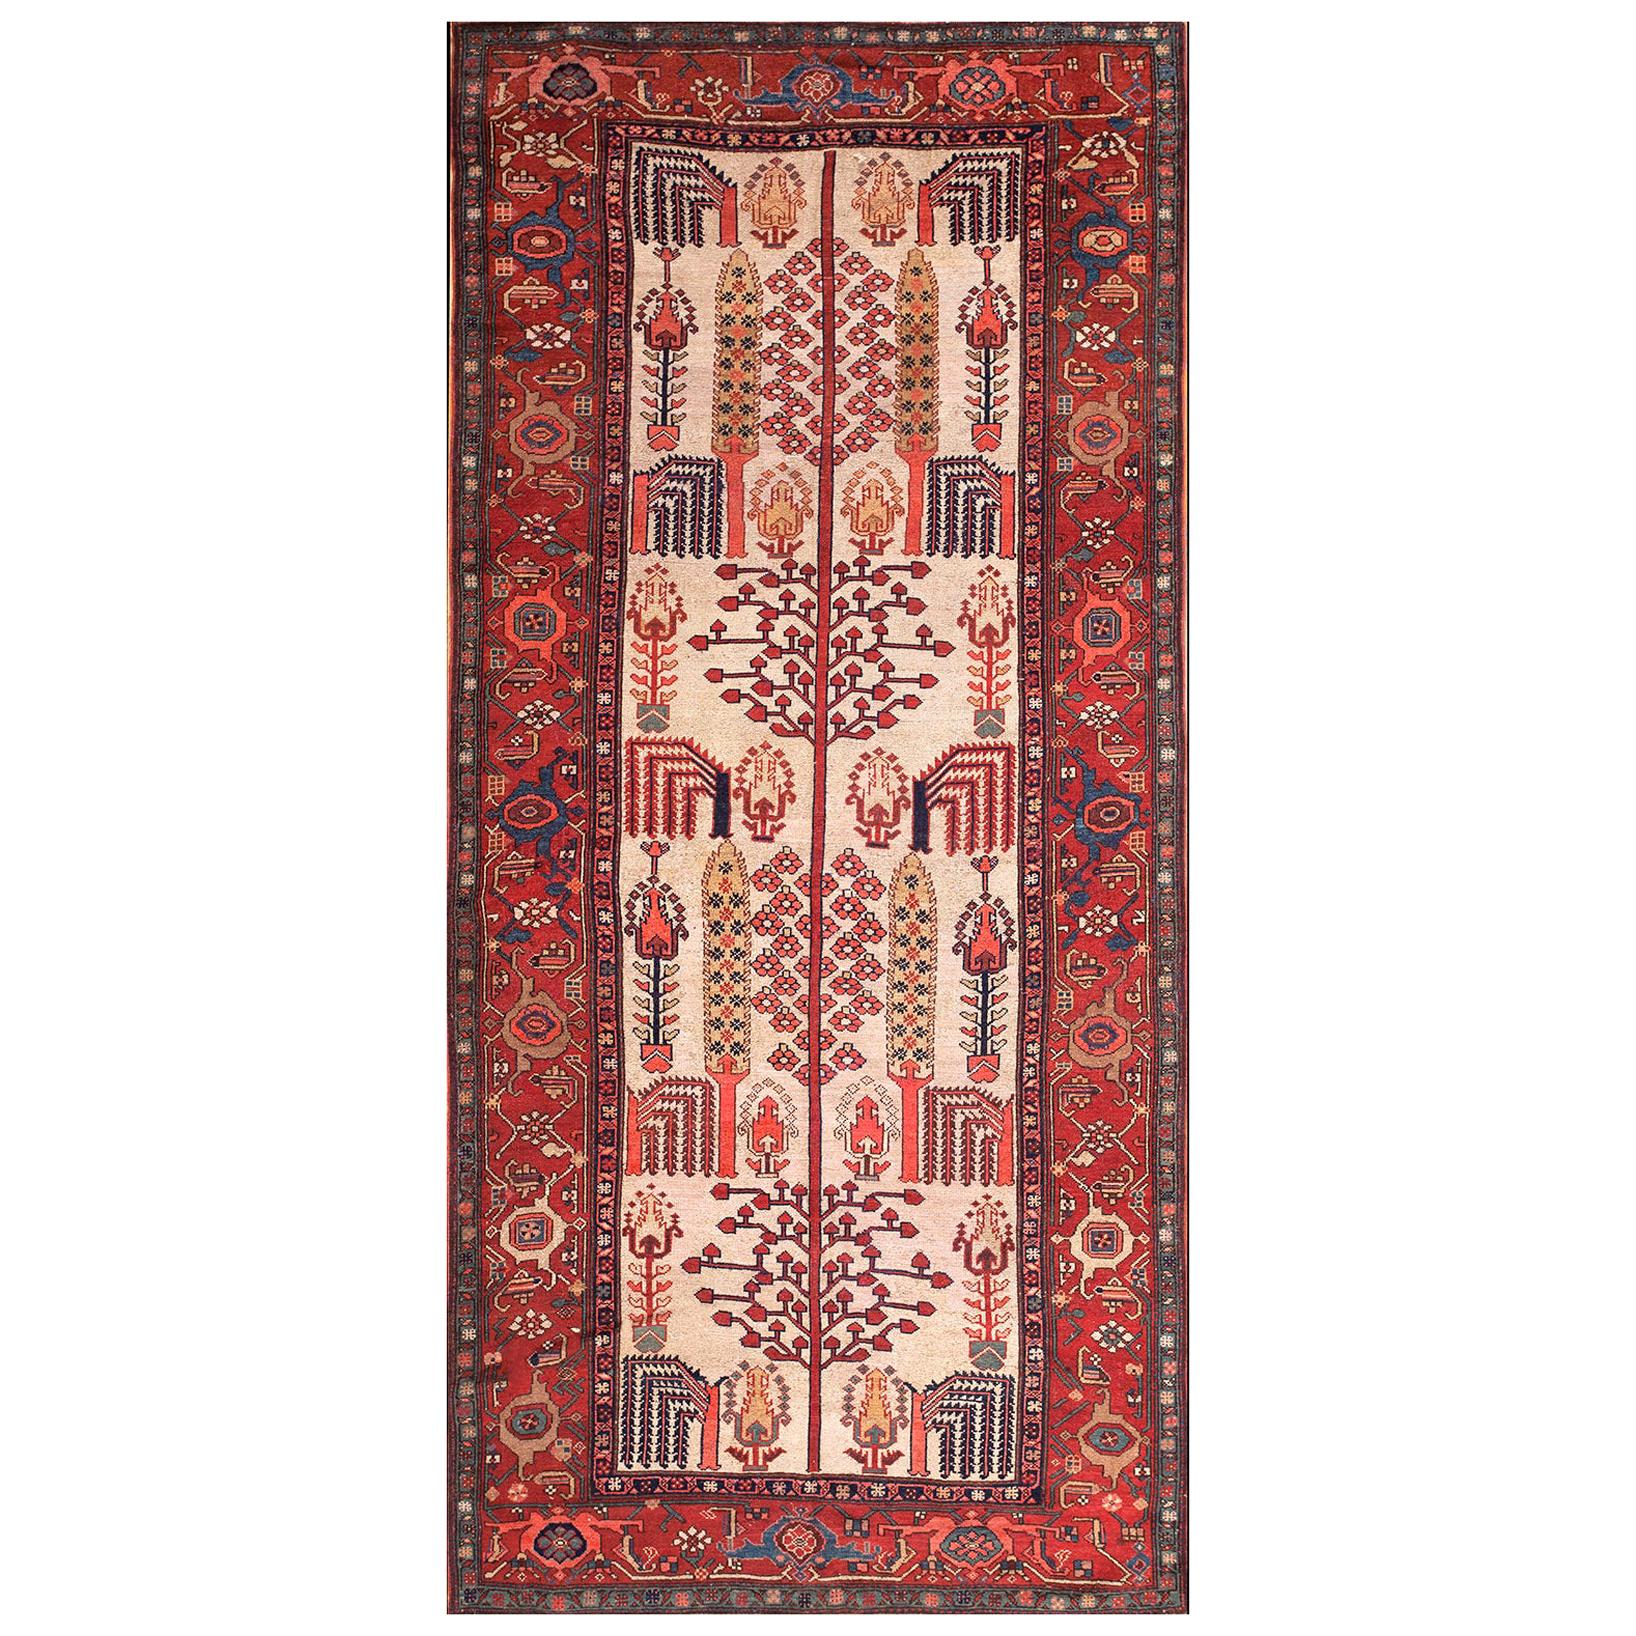 Mid 19th Century N.W. Persian Carpet ( 5'3"x 11'2" - 160 x 340 ) For Sale